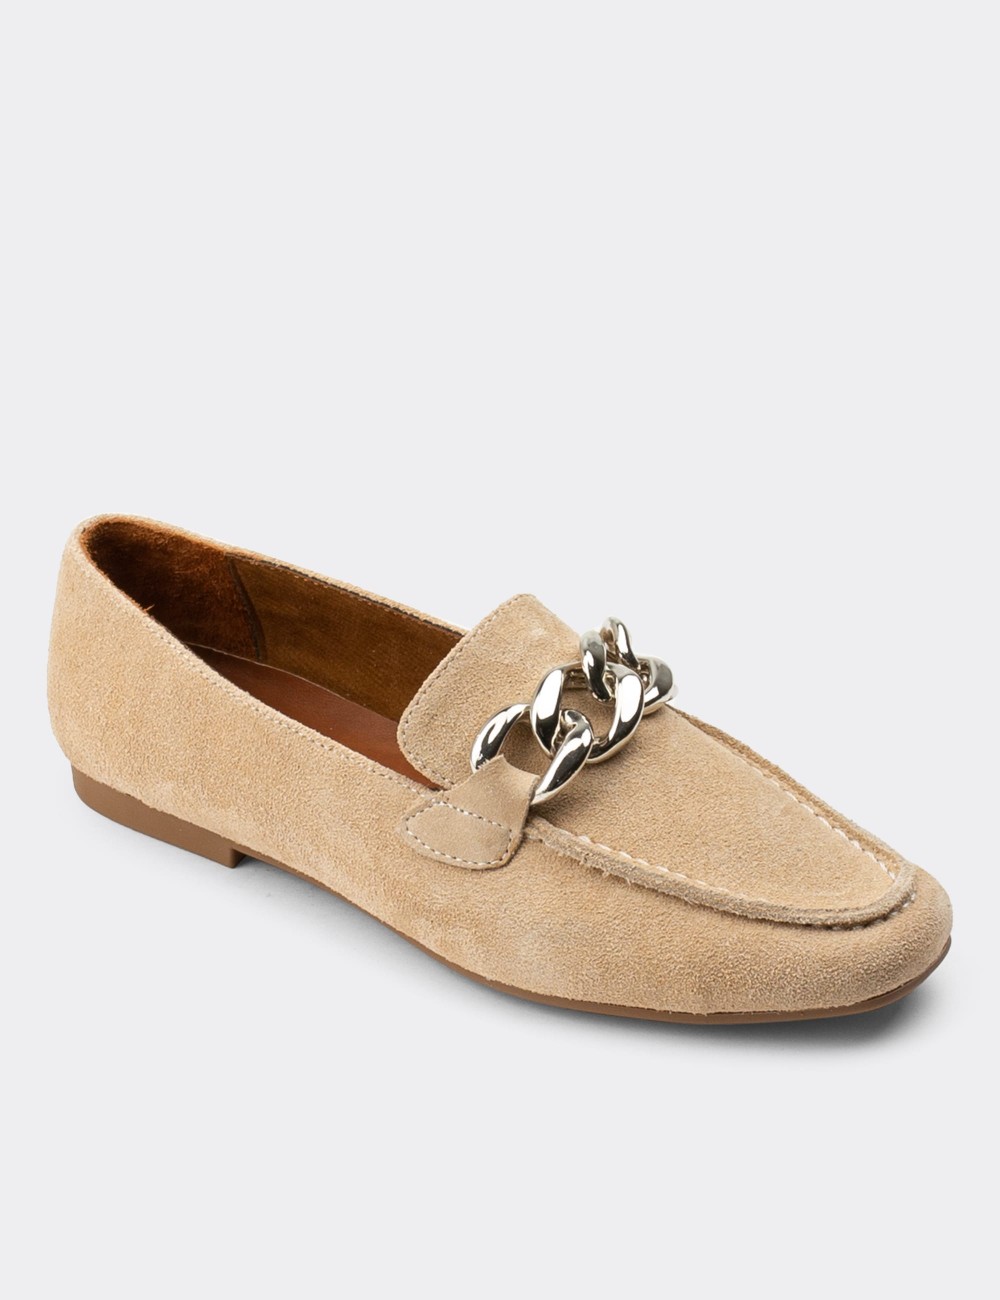 Beige Suede Leather Loafers - 01915ZBEJC01